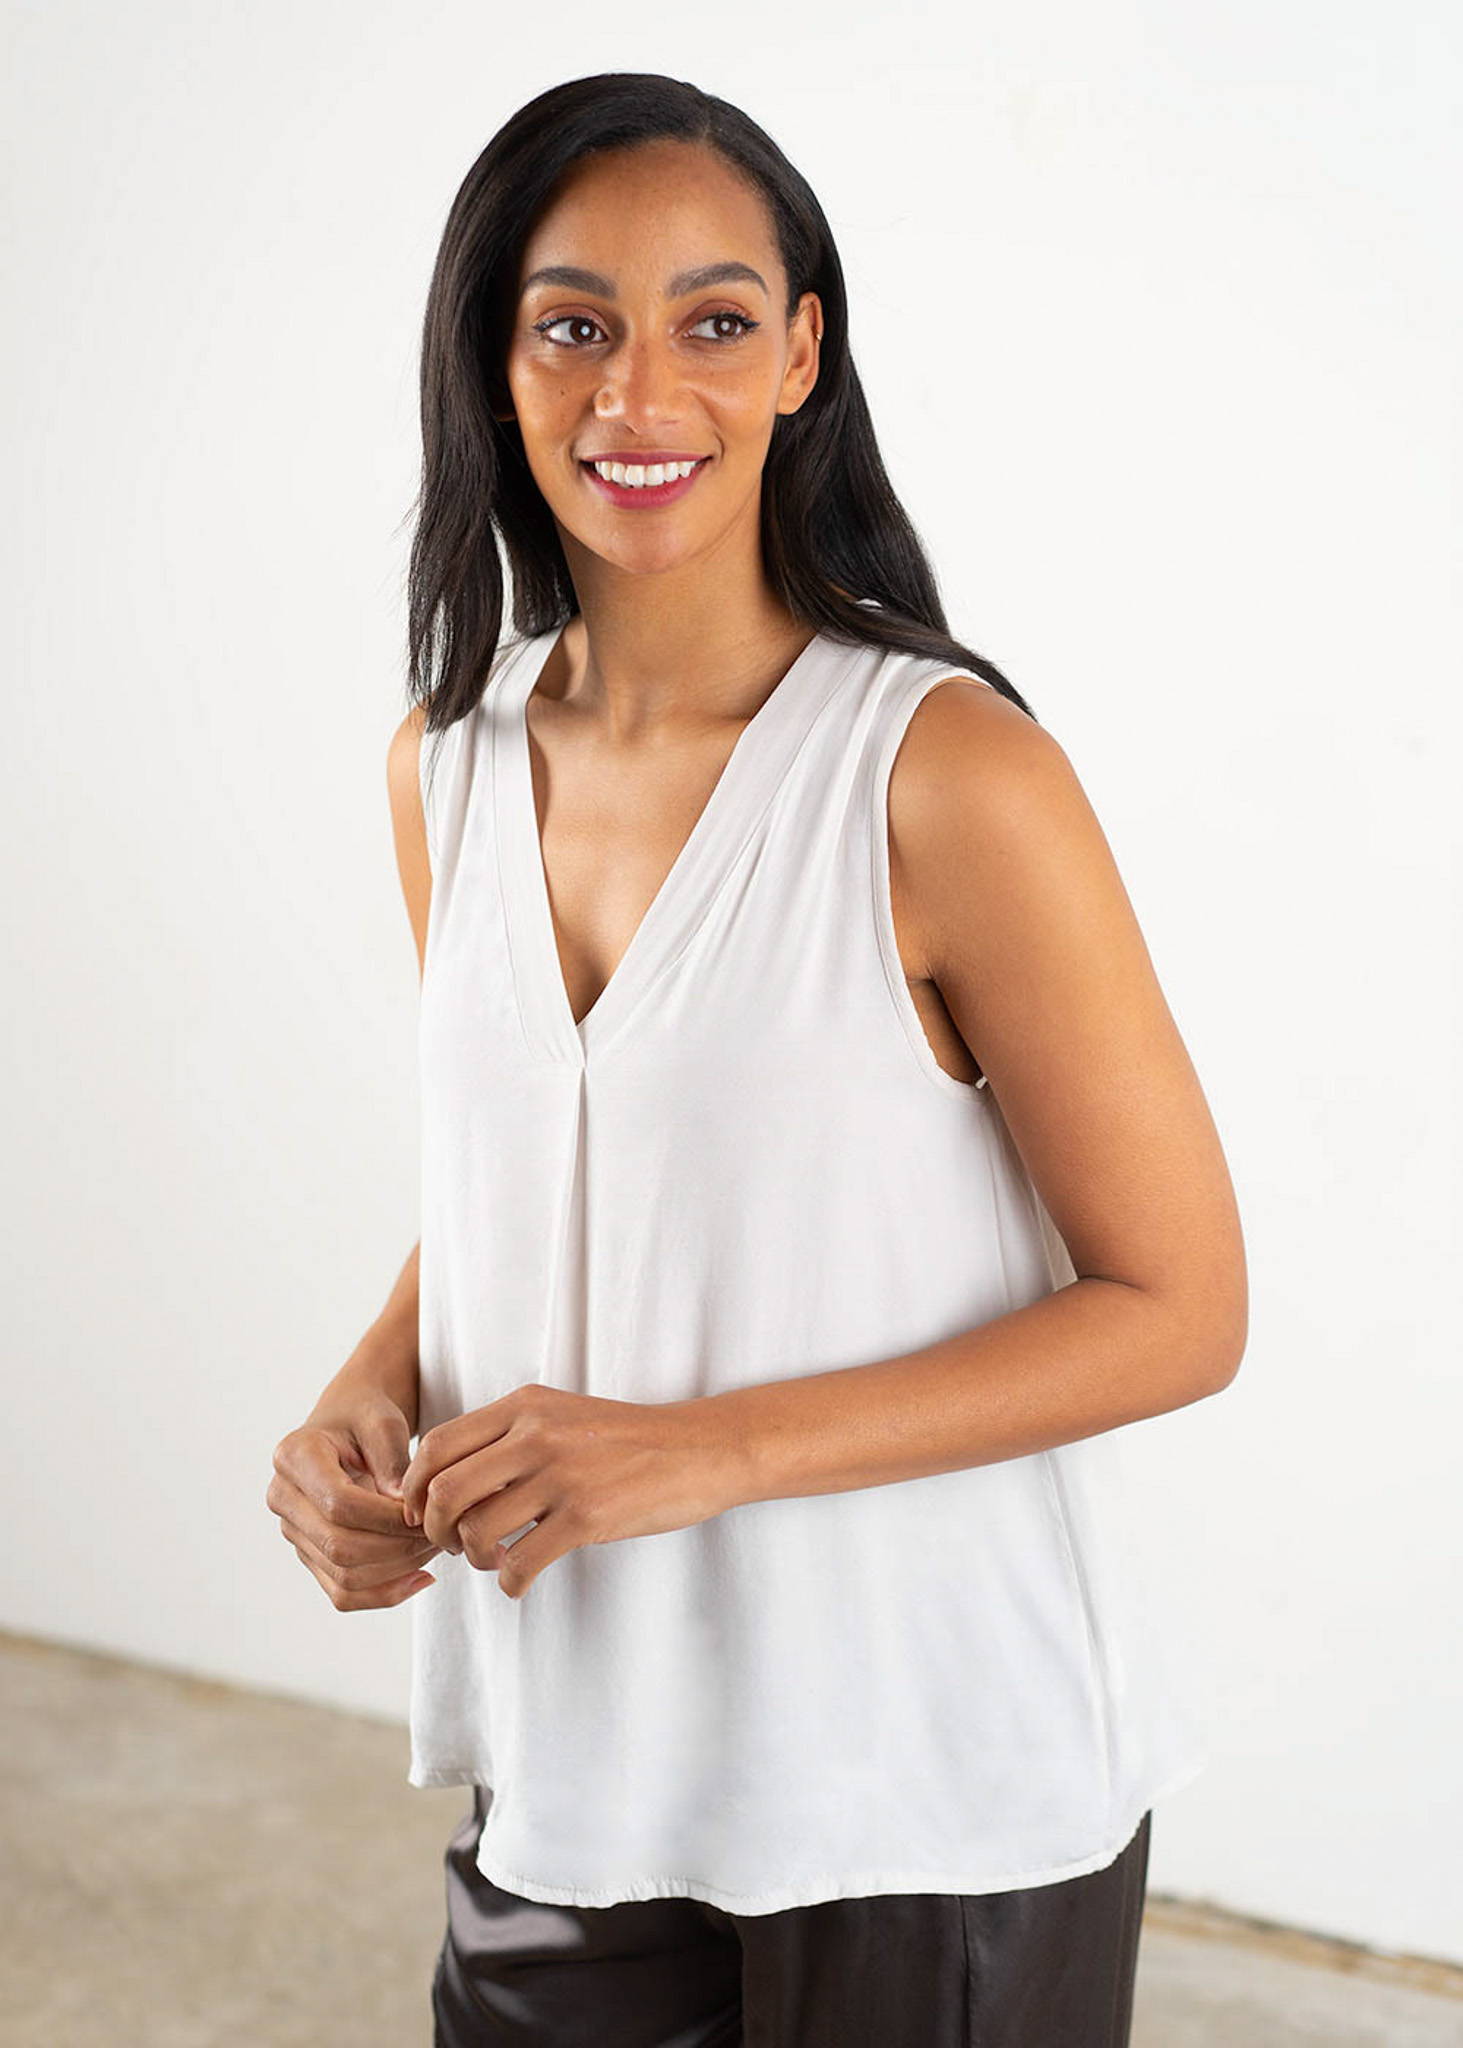 A model wearing an off white sleeveless, v neck top and black trousers.